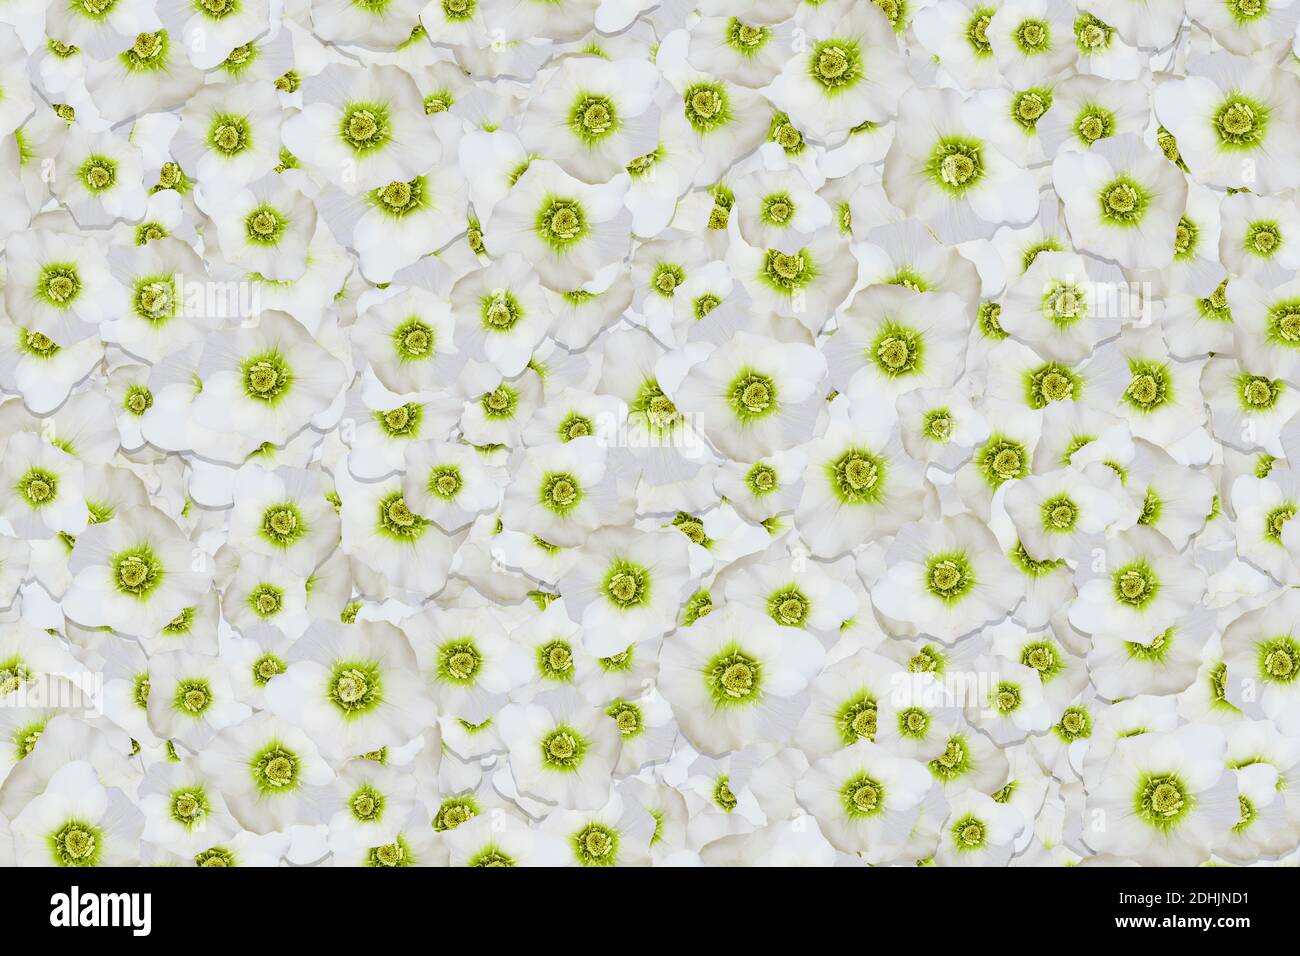 Floral background of a mass of white hellebore flowers Stock Photo - Alamy